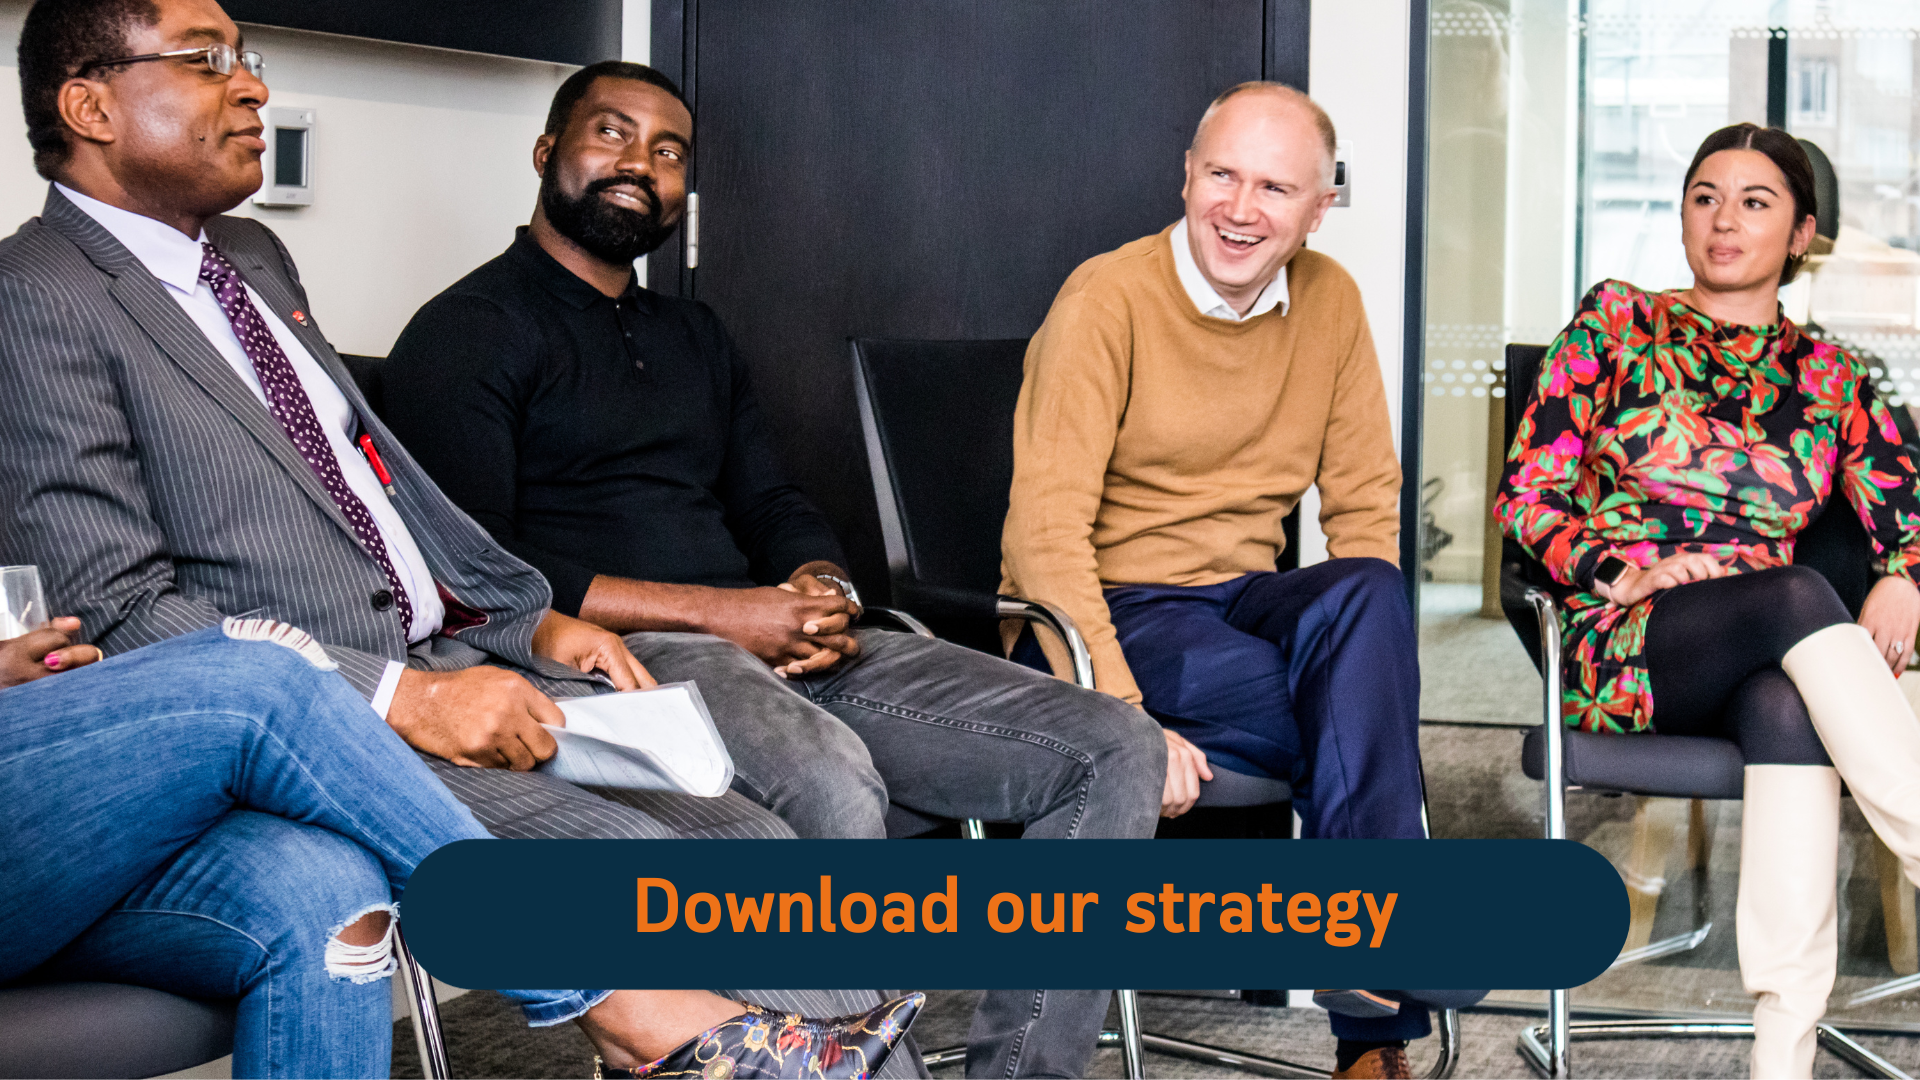 Tom Riordan and Charles Egbu in conversation with our call to action to download the new IG strategy